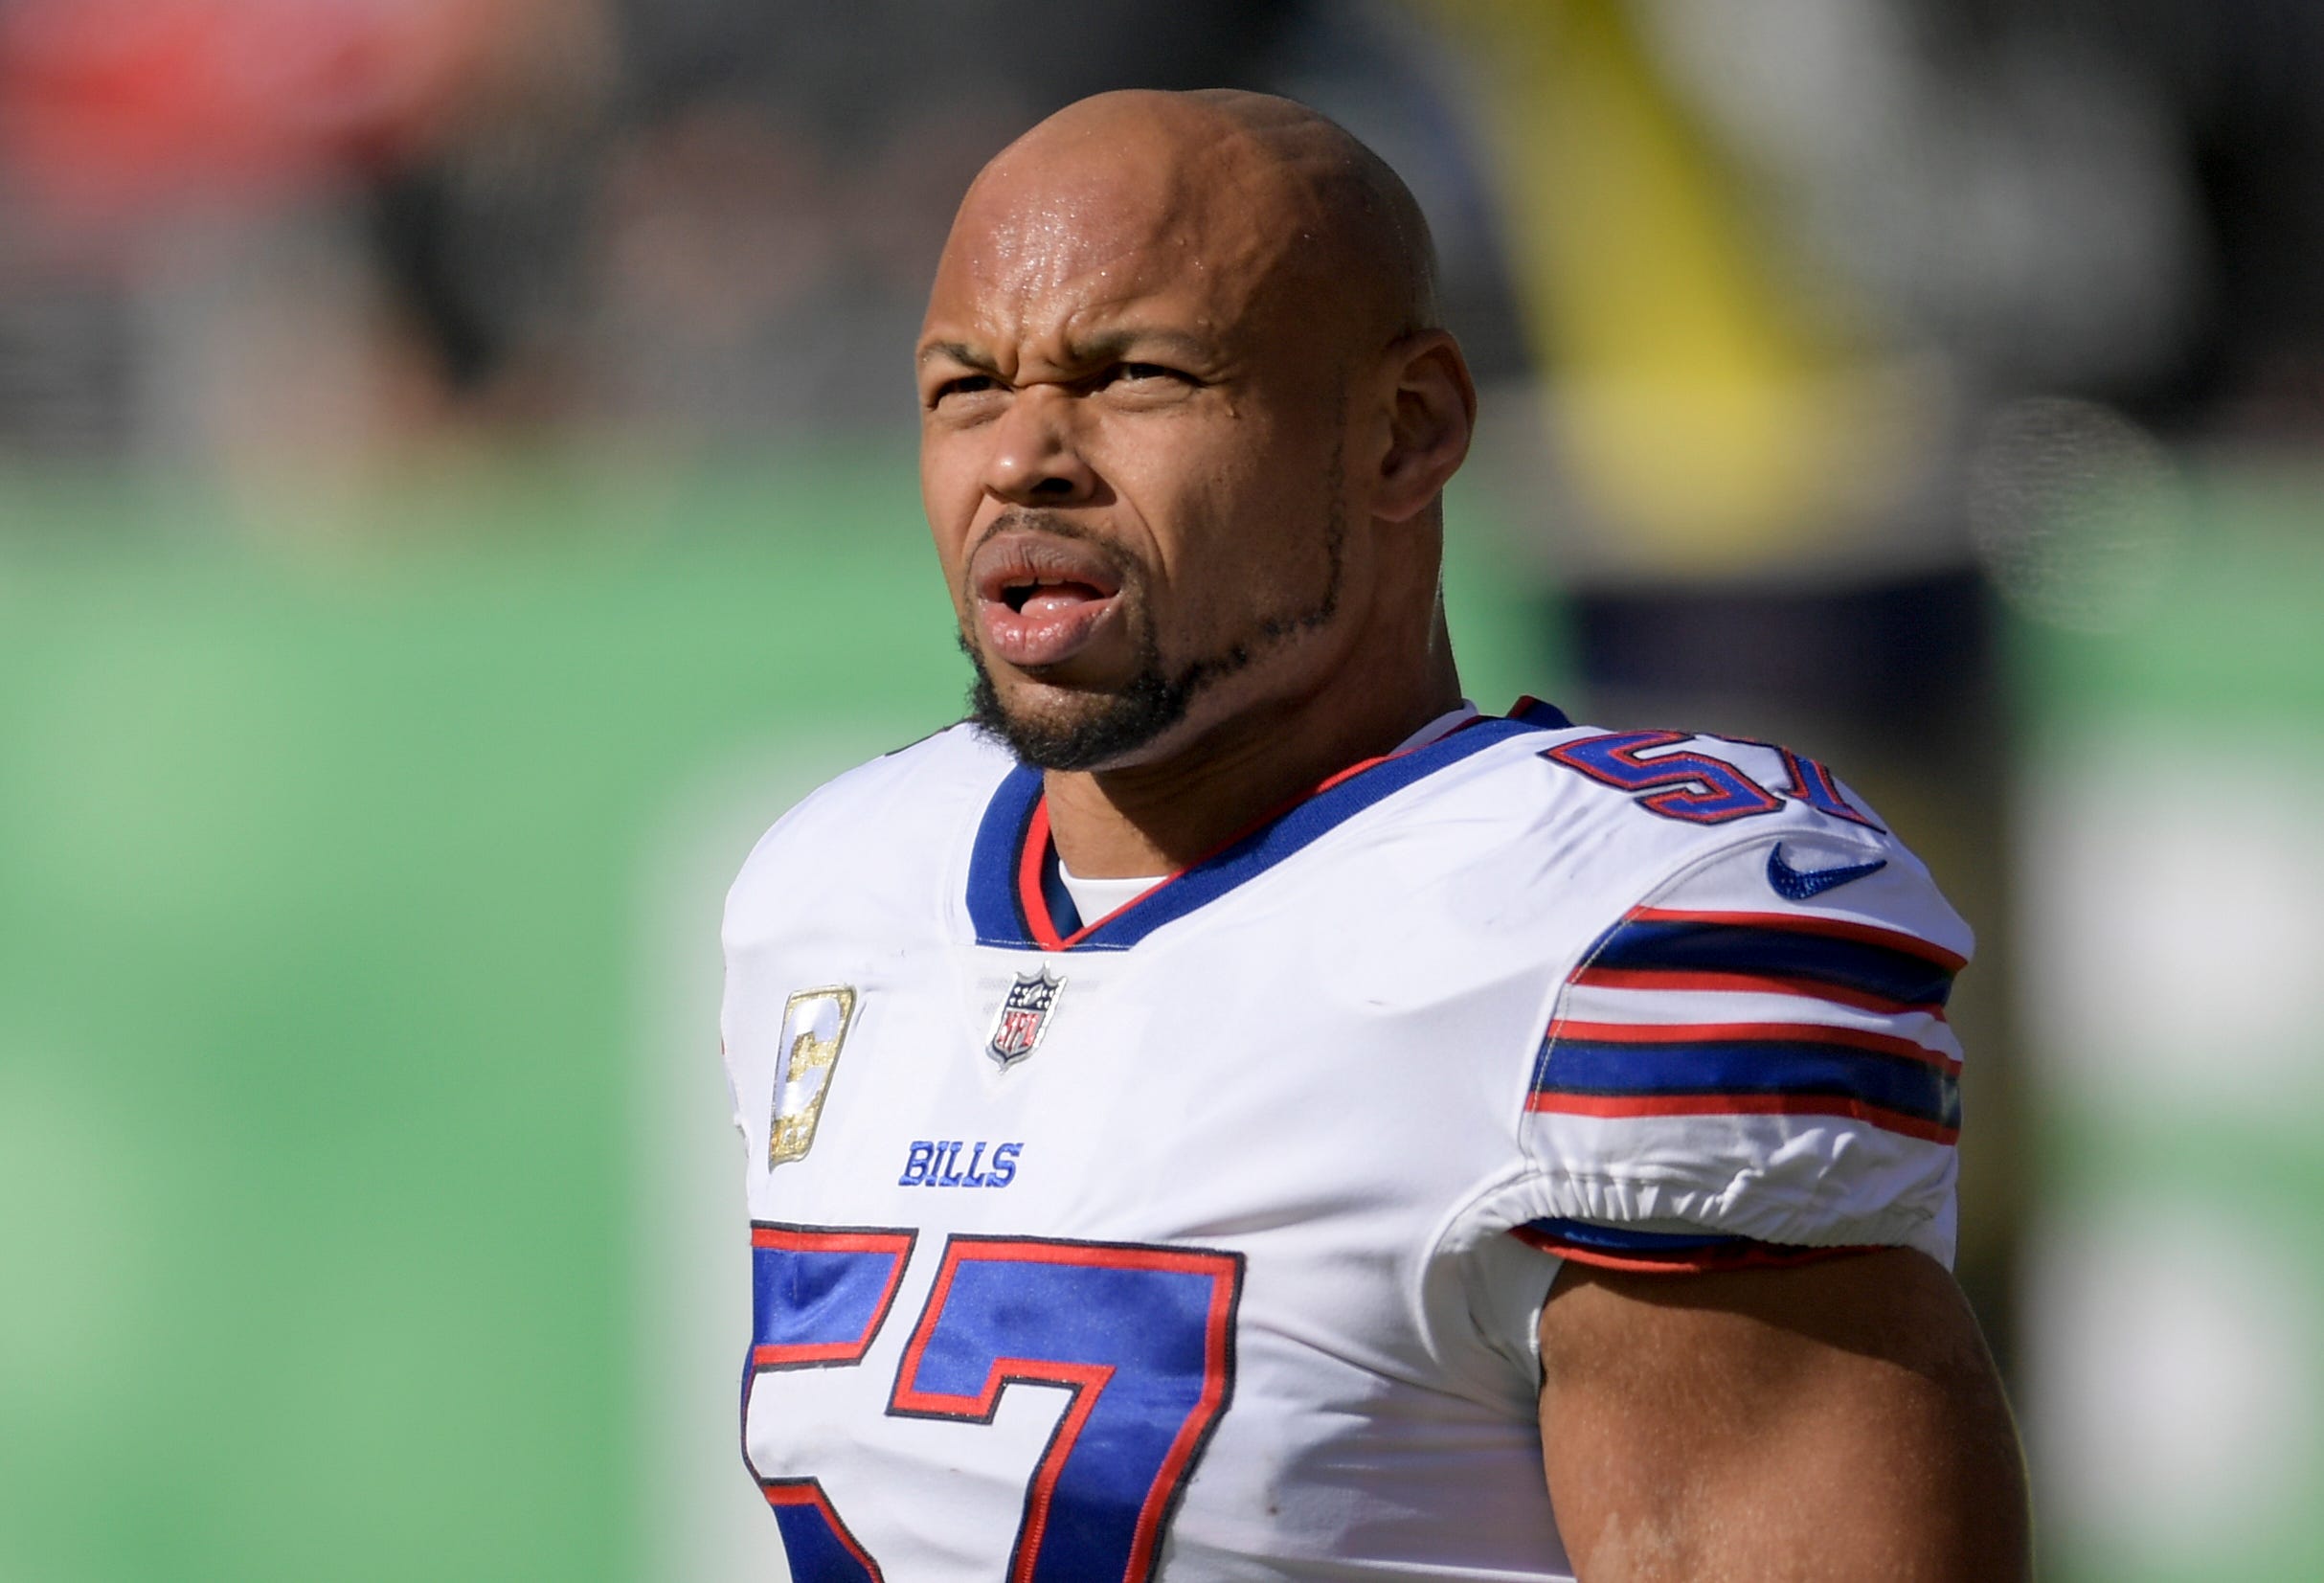 Alexander re-signs with Bills for what he calls final season